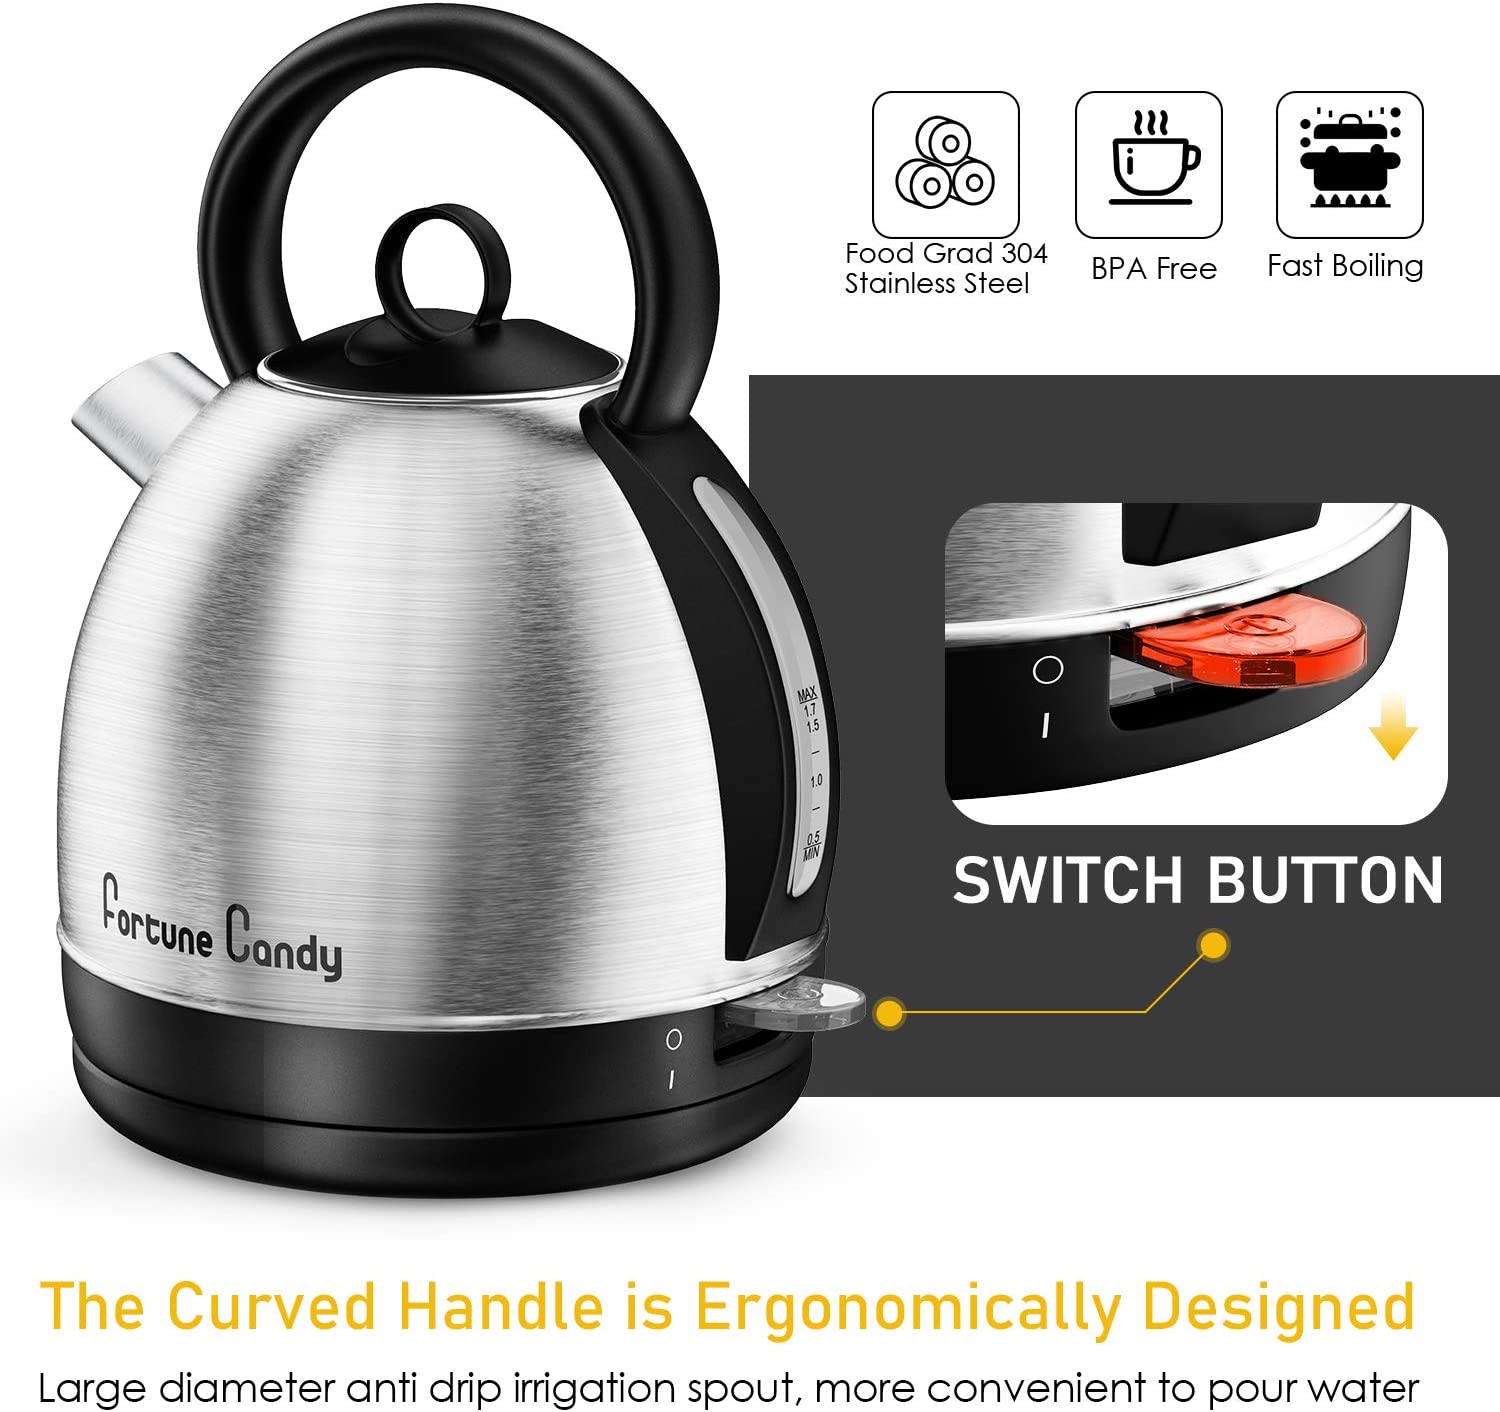 1.7L/1500W Fast Boiling Stainless Steel Electric Tea Kettle